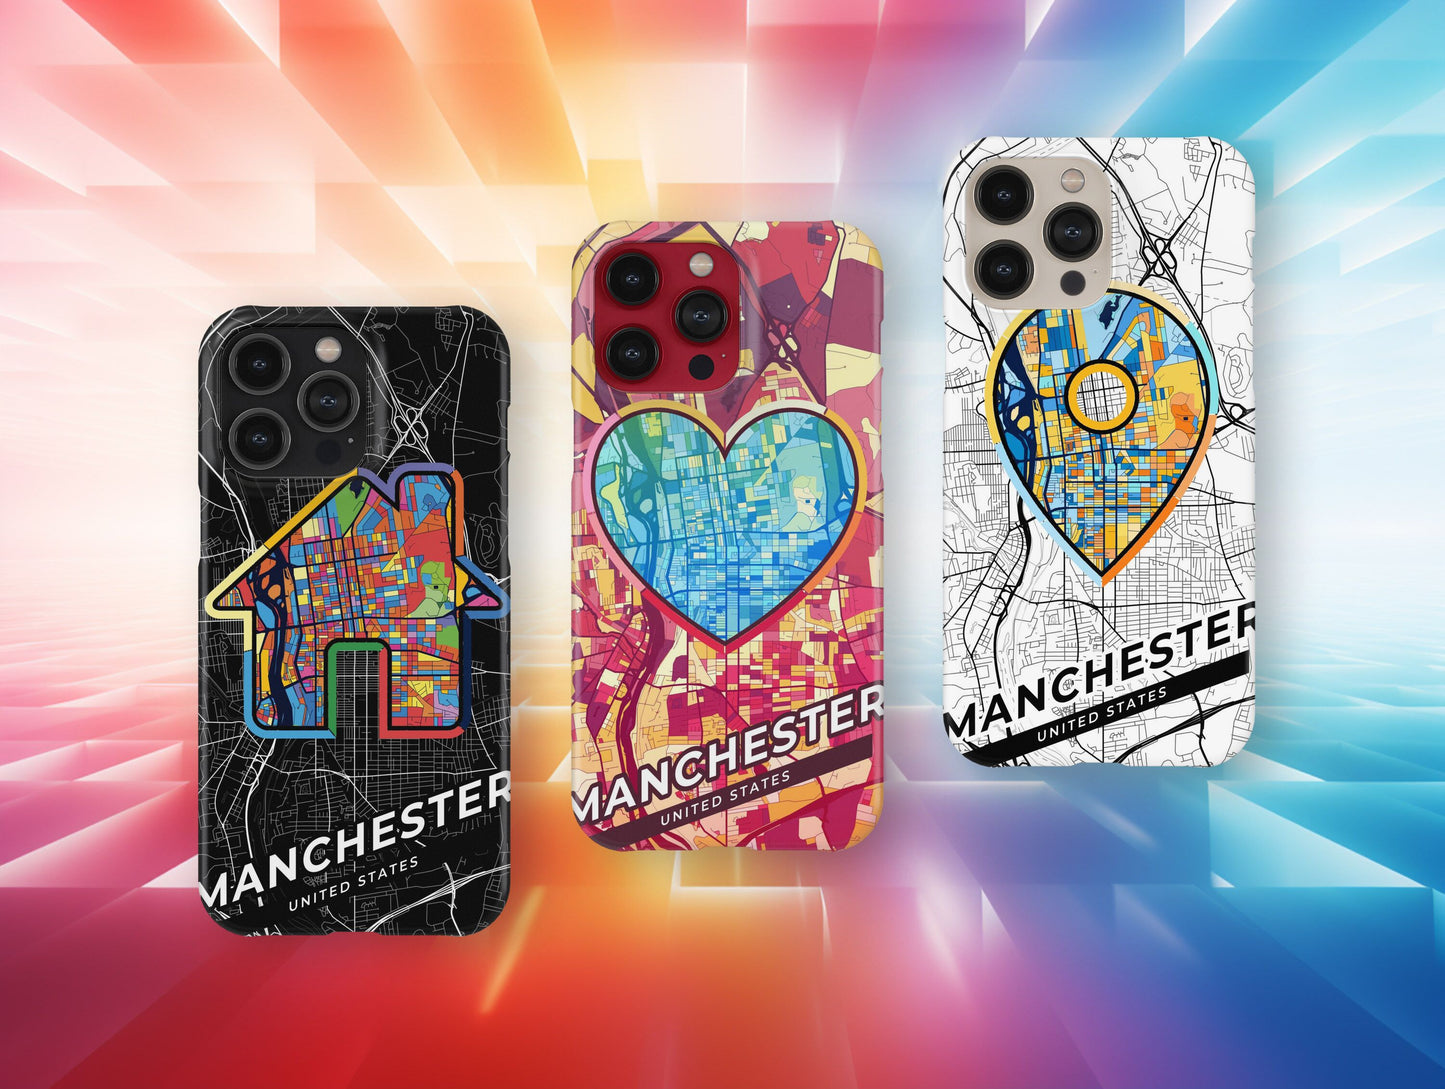 Manchester New Hampshire slim phone case with colorful icon. Birthday, wedding or housewarming gift. Couple match cases.